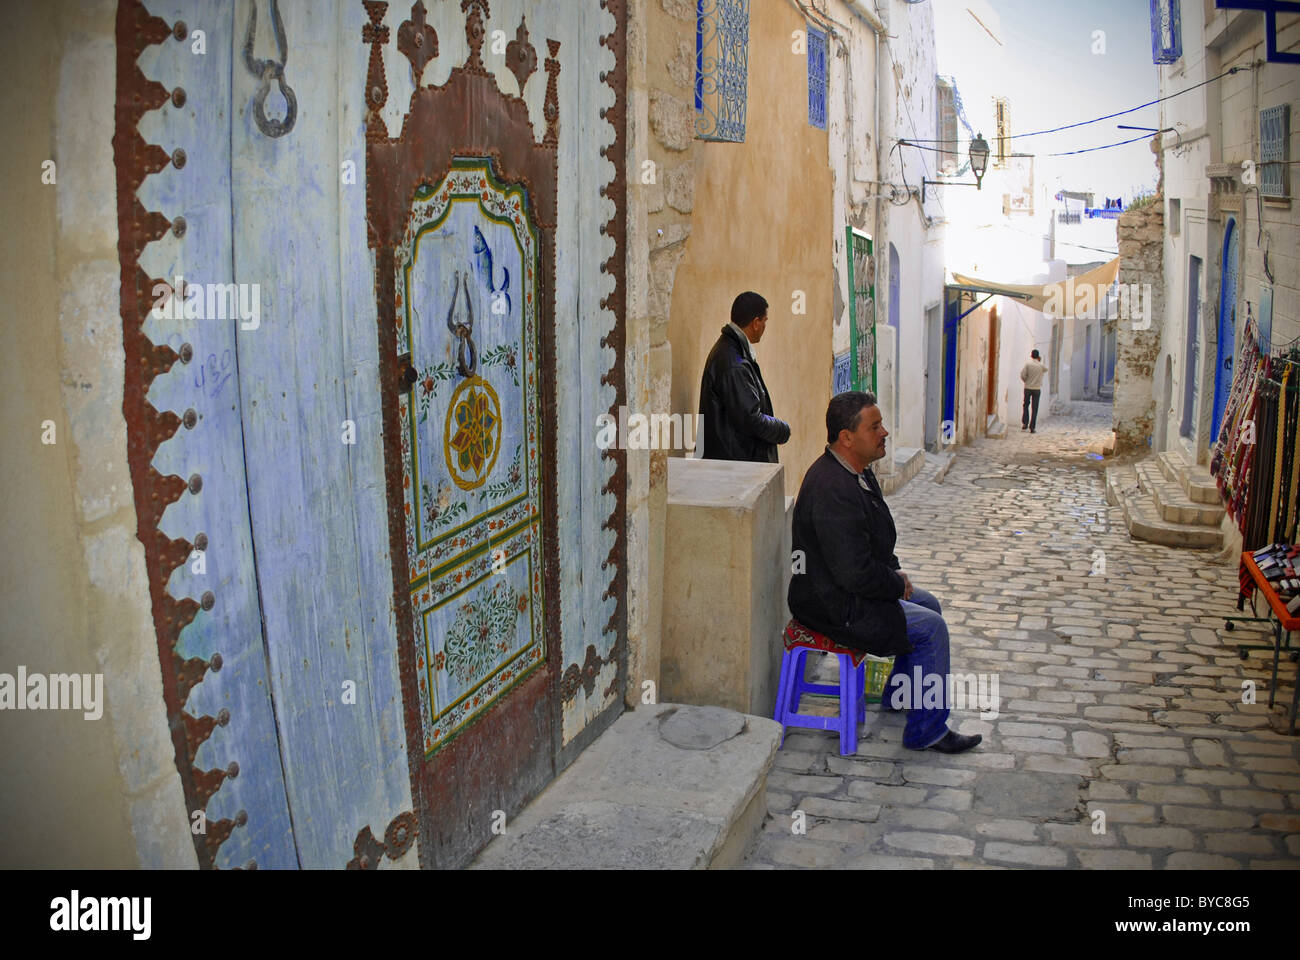 Street scene in Sousse Medina with men sitting and colorful door, Tunisia Stock Photo